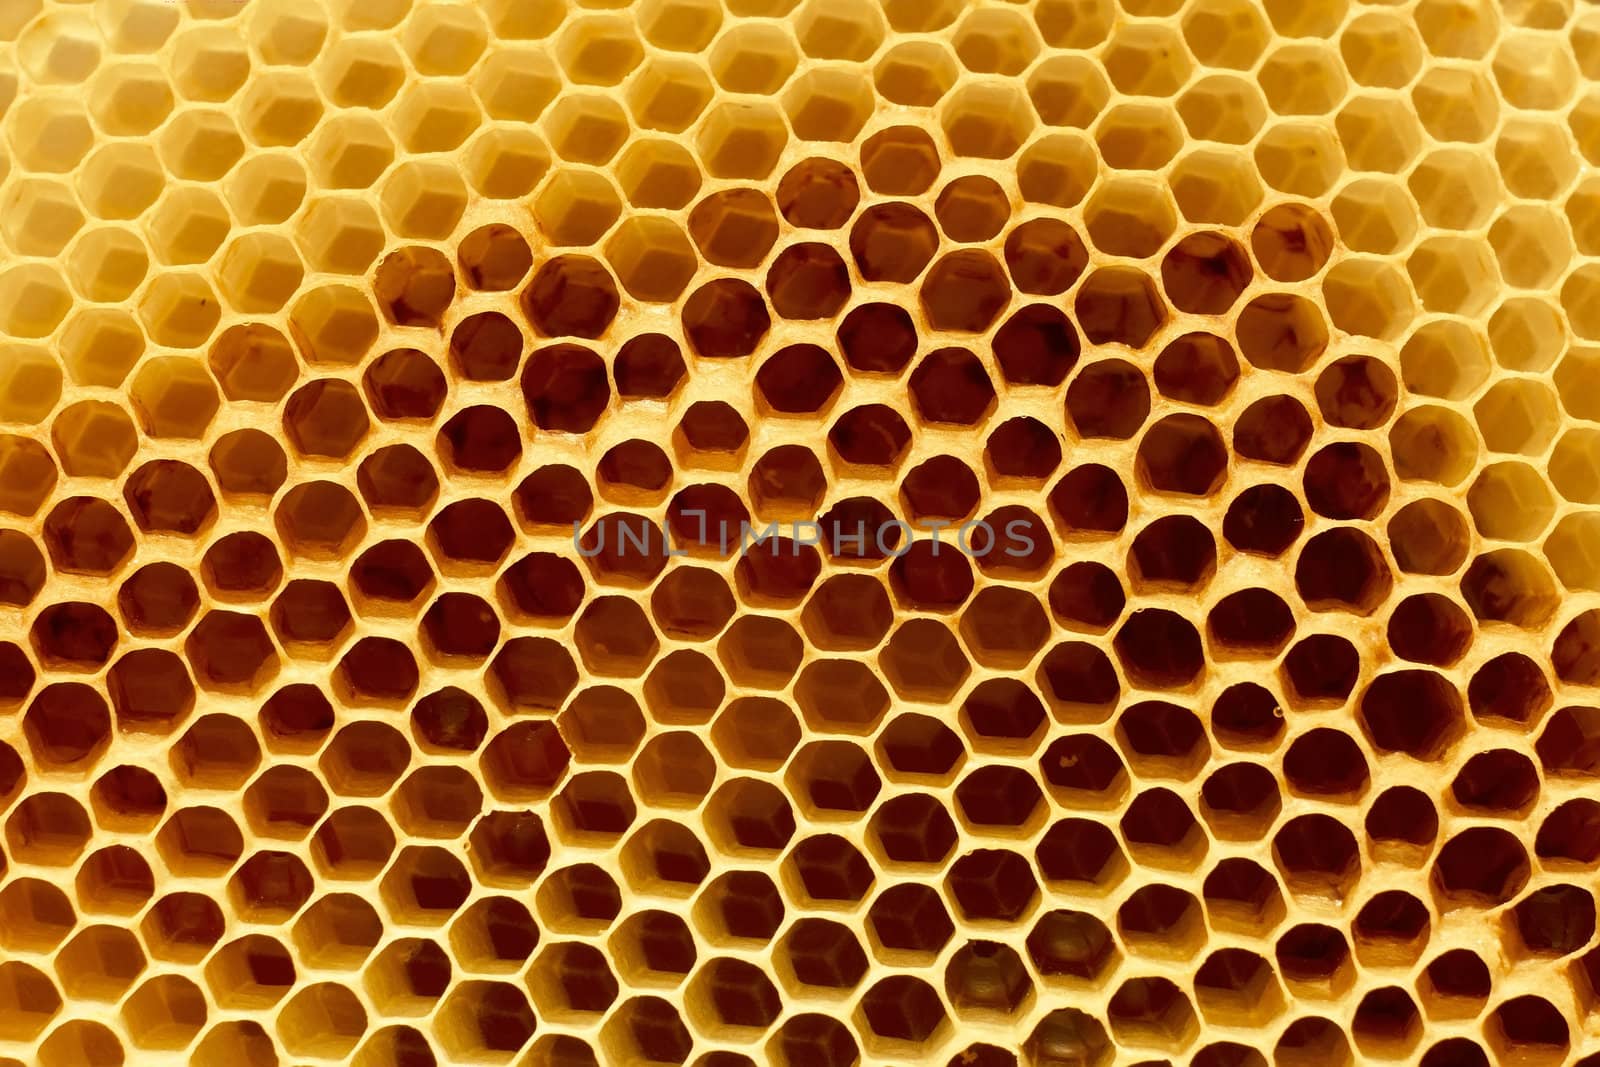 Fragment of honeycomb with empty cells in bright sunlight